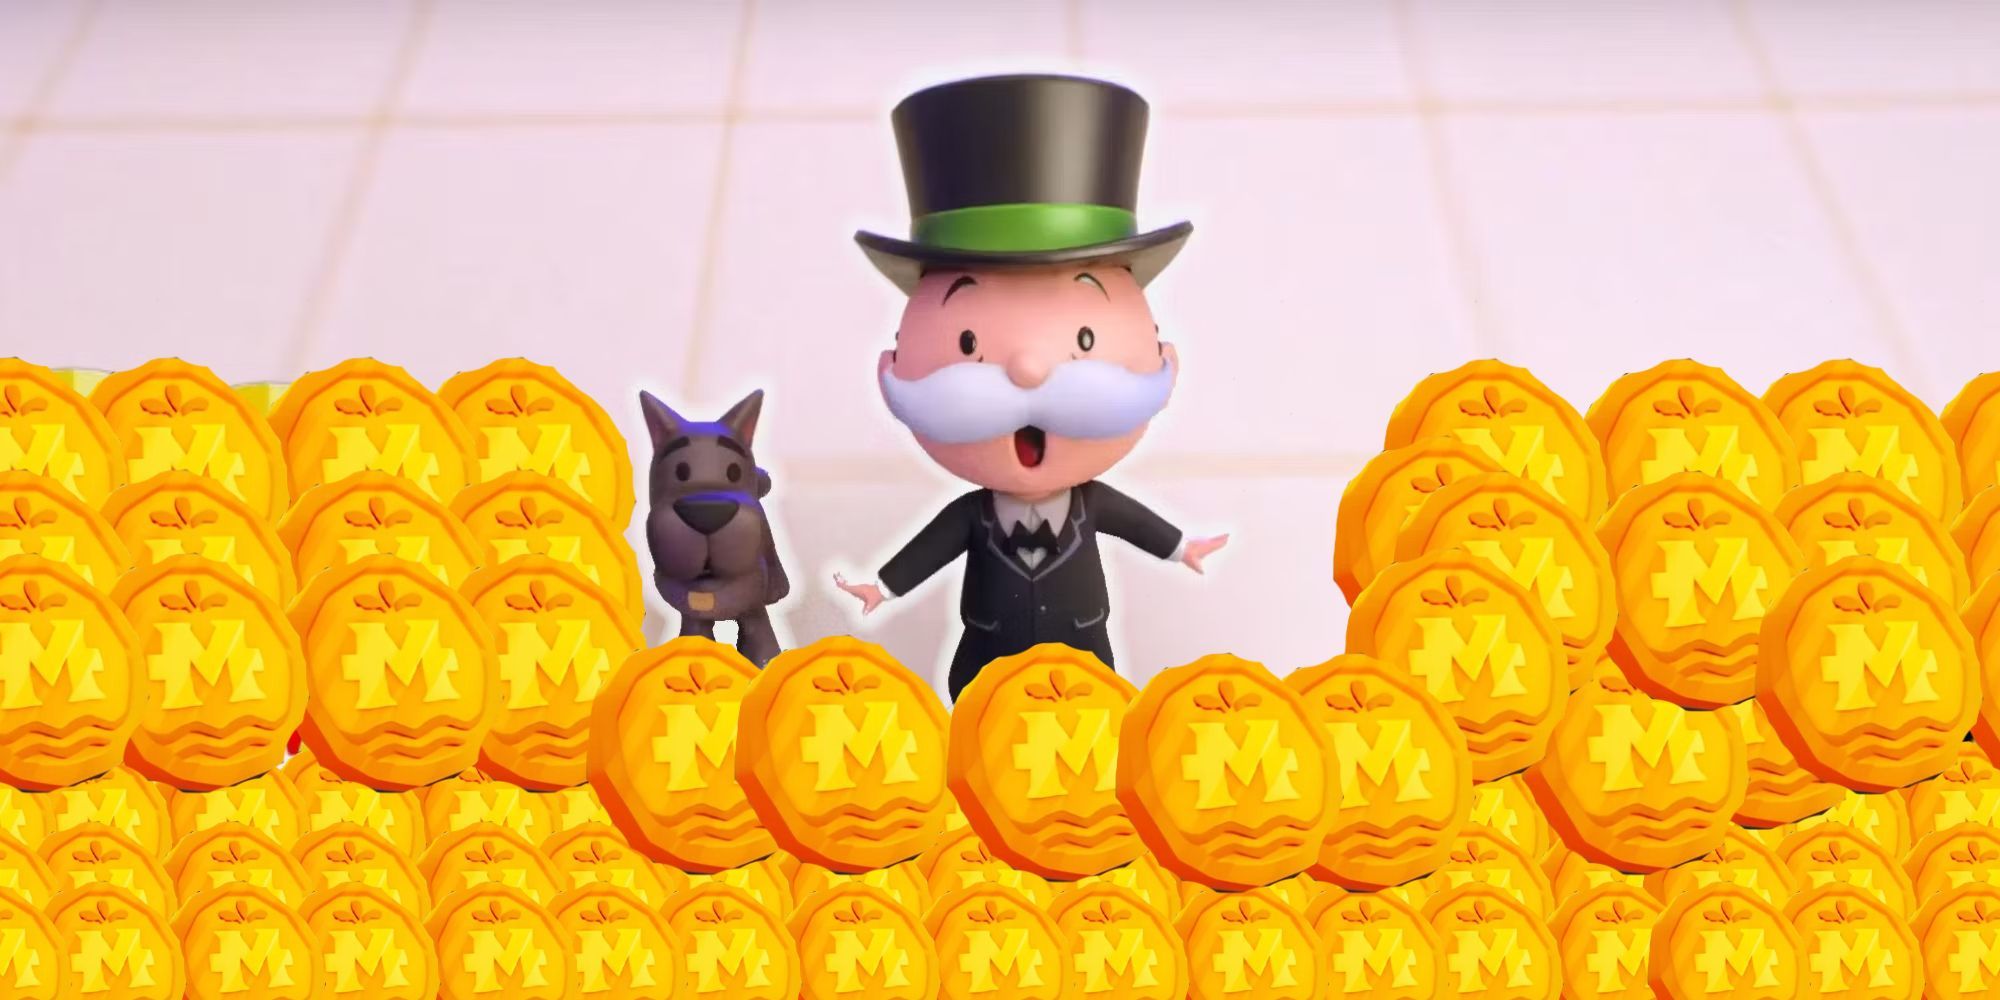 Monopoly Go, Mr. Monopoly and his dog surrounded by Coin Tokens